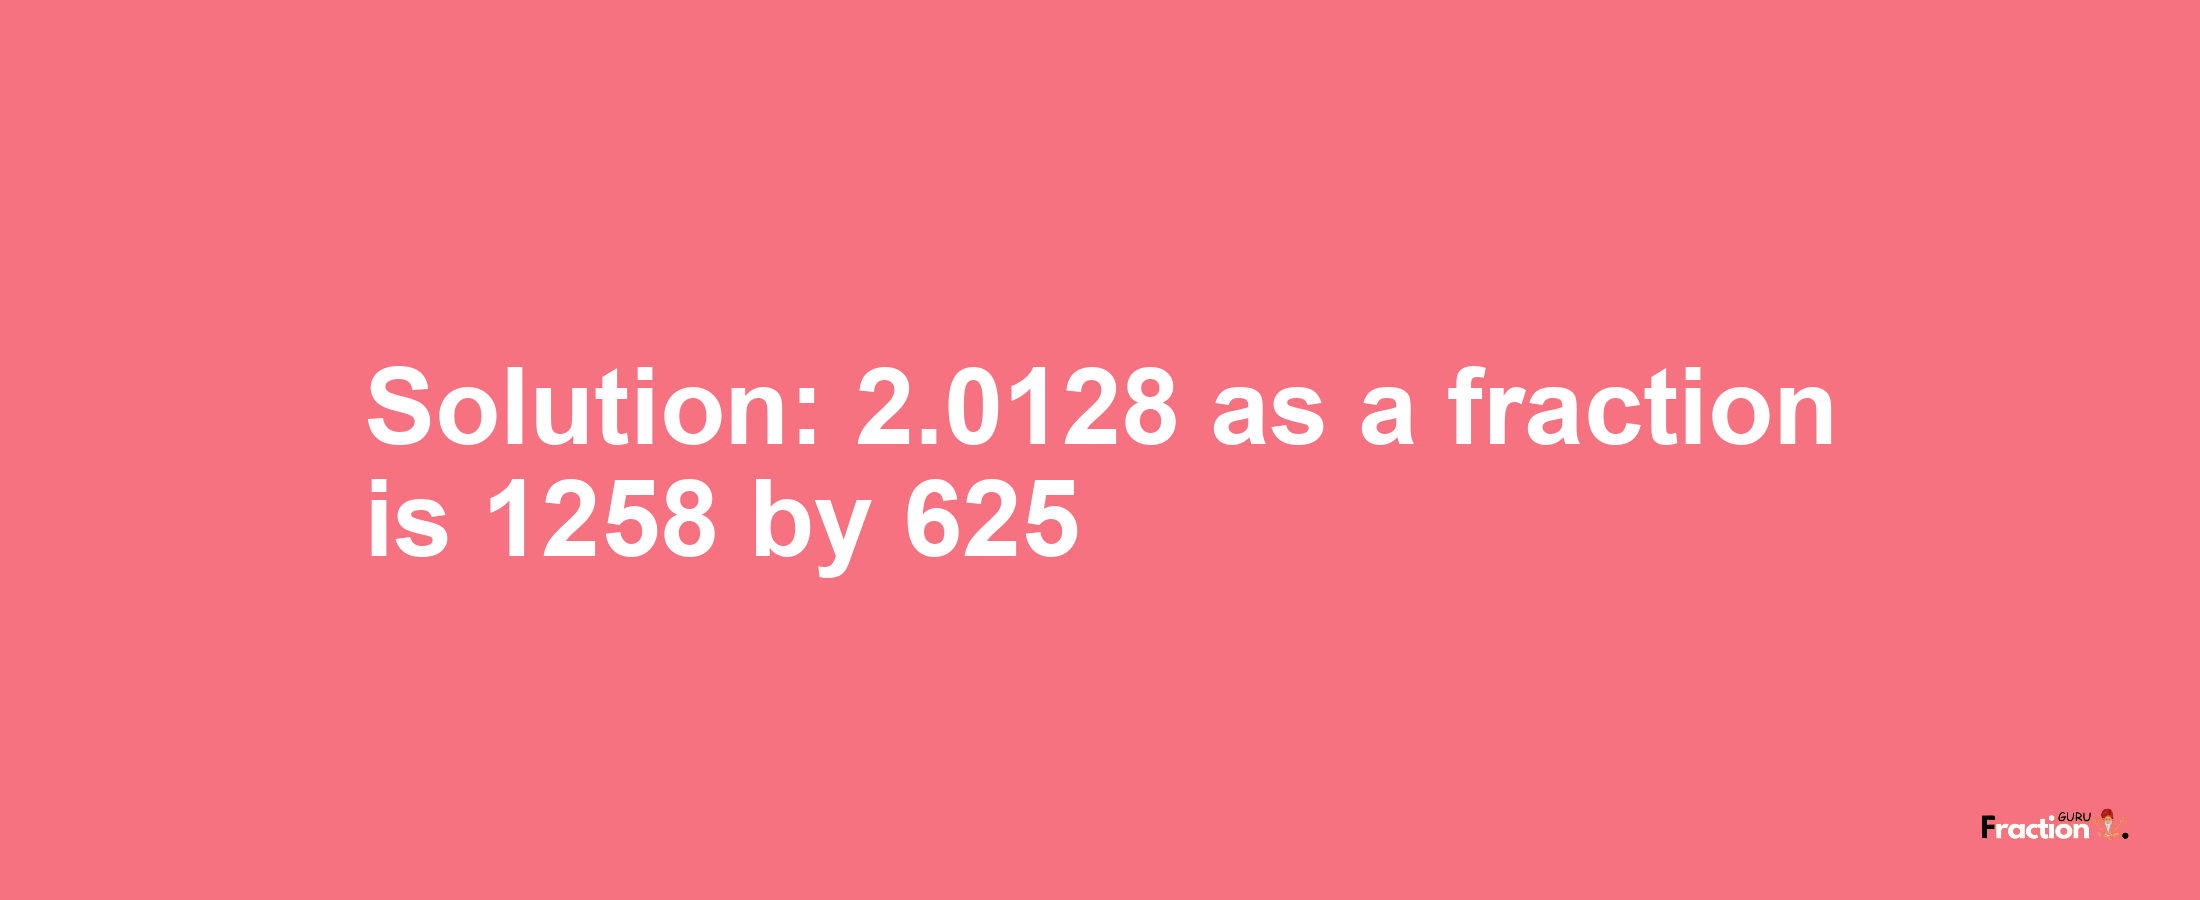 Solution:2.0128 as a fraction is 1258/625